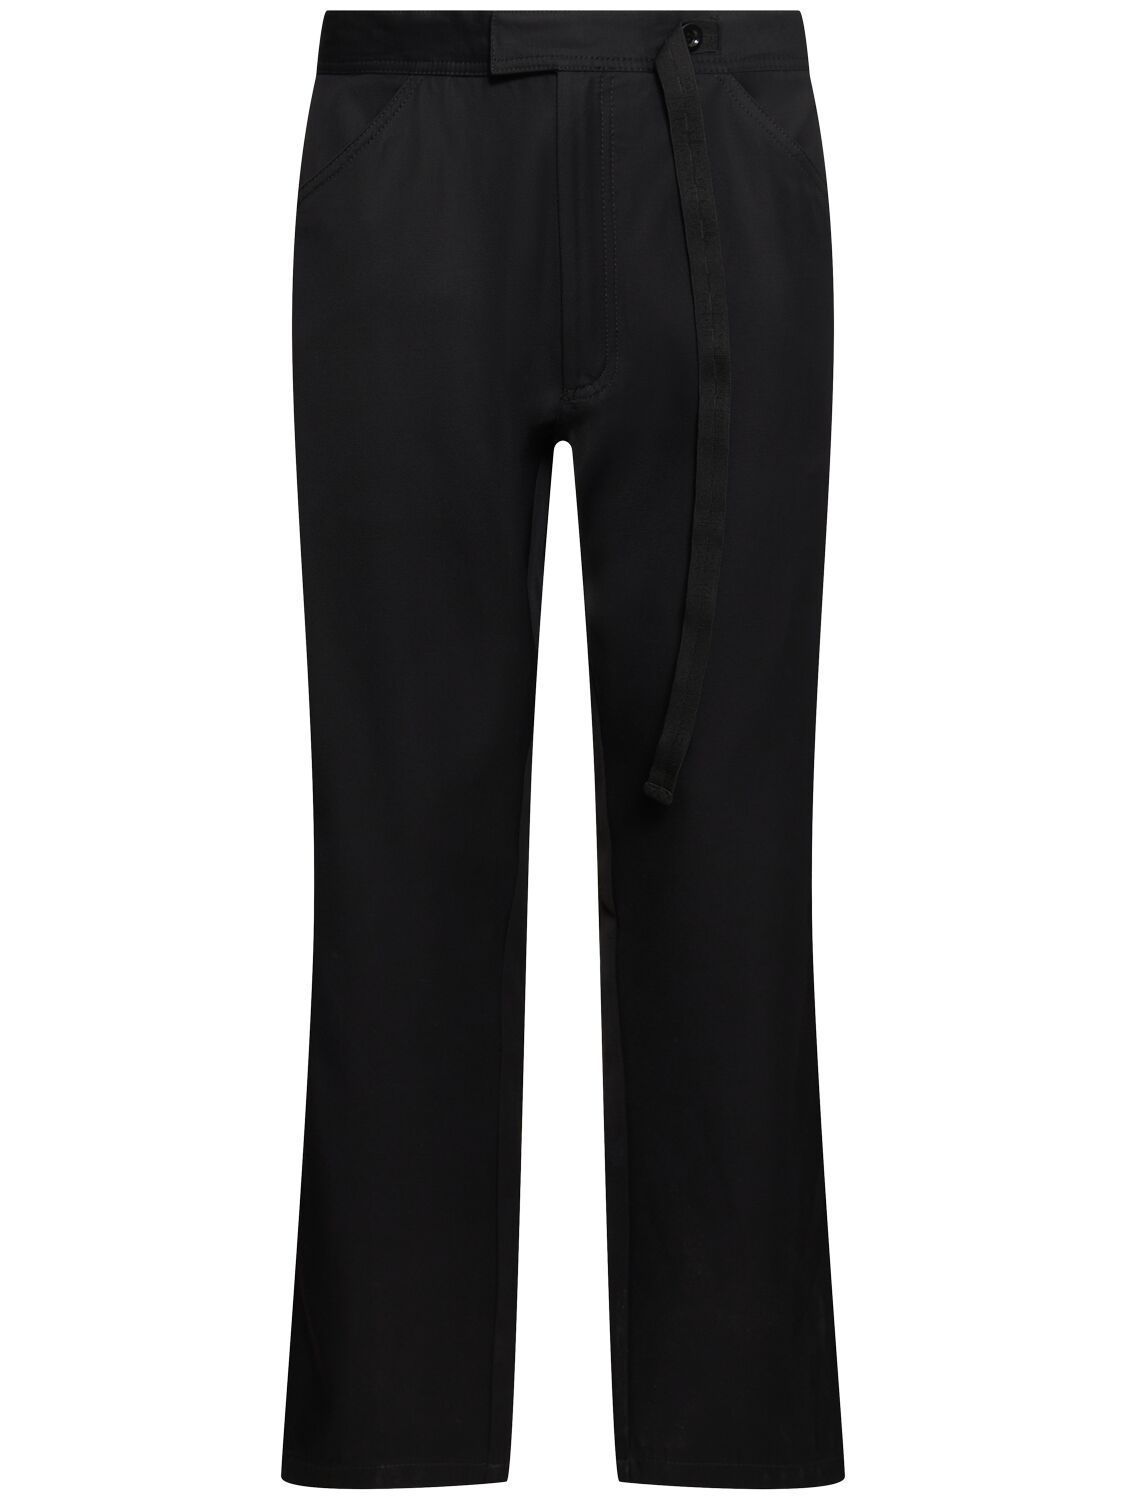 4sdesigns Viscose & Cotton Twill Formal Trousers In Black